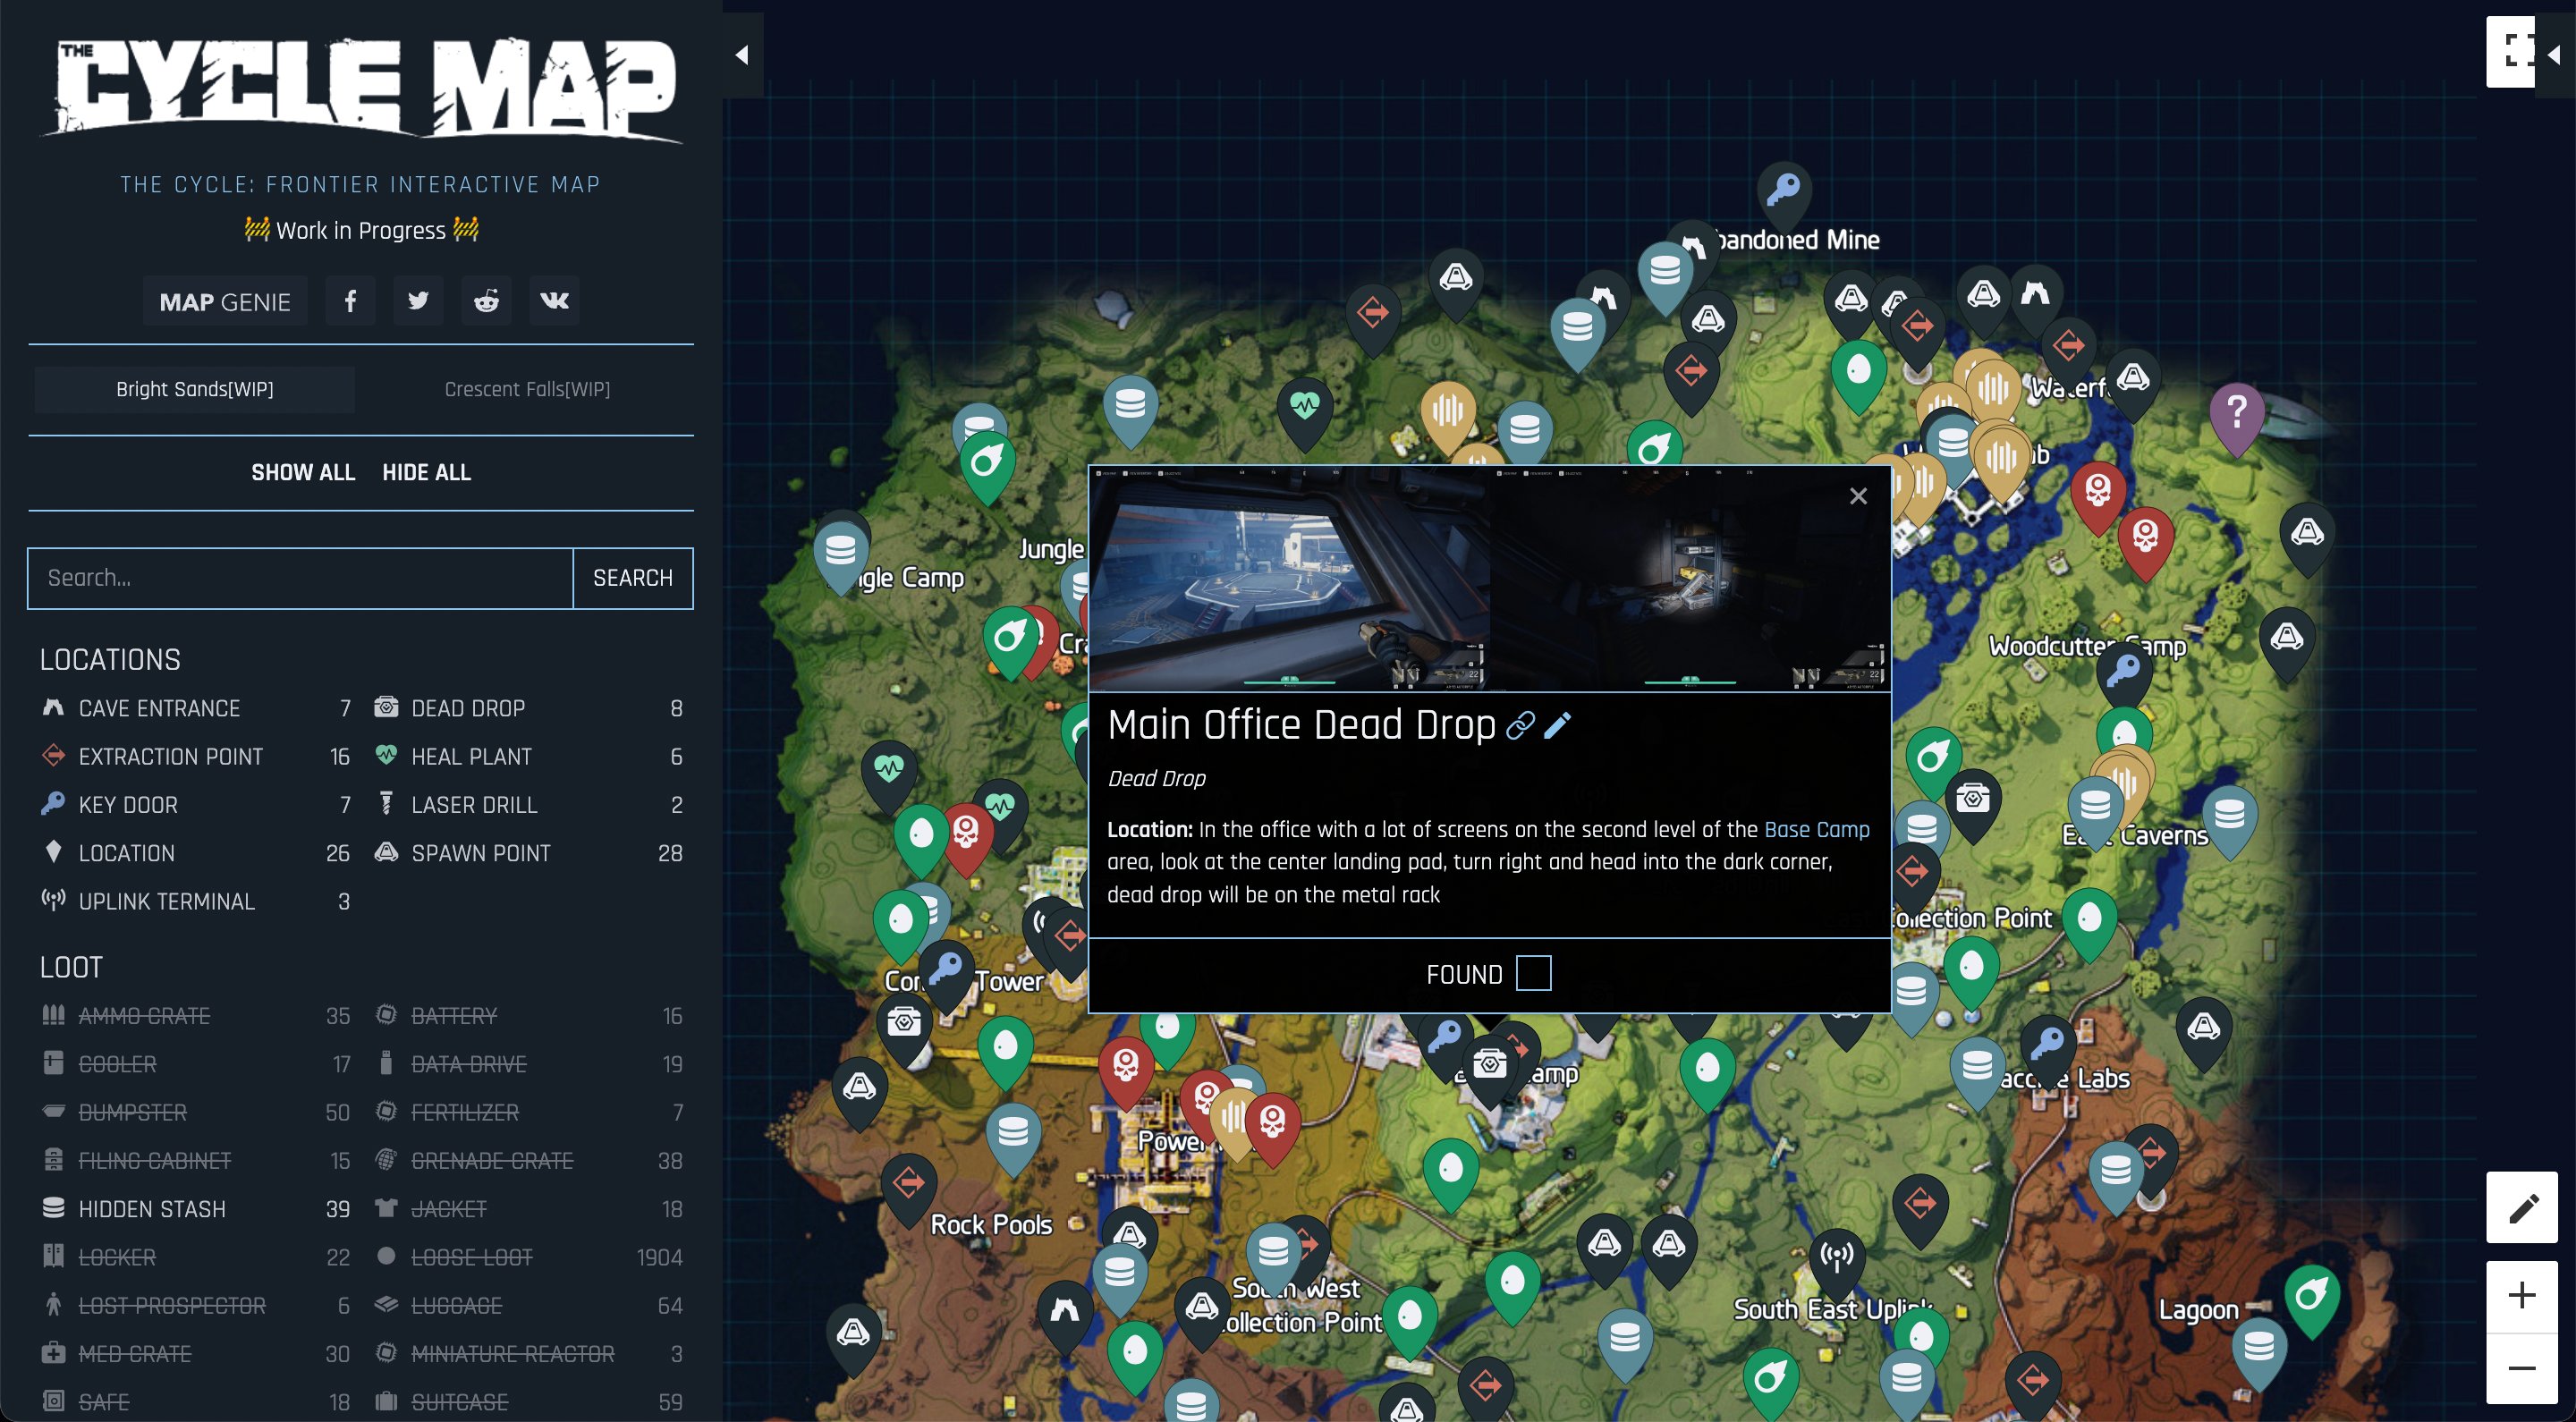 Map Genie  Awesome Interactive Game Maps